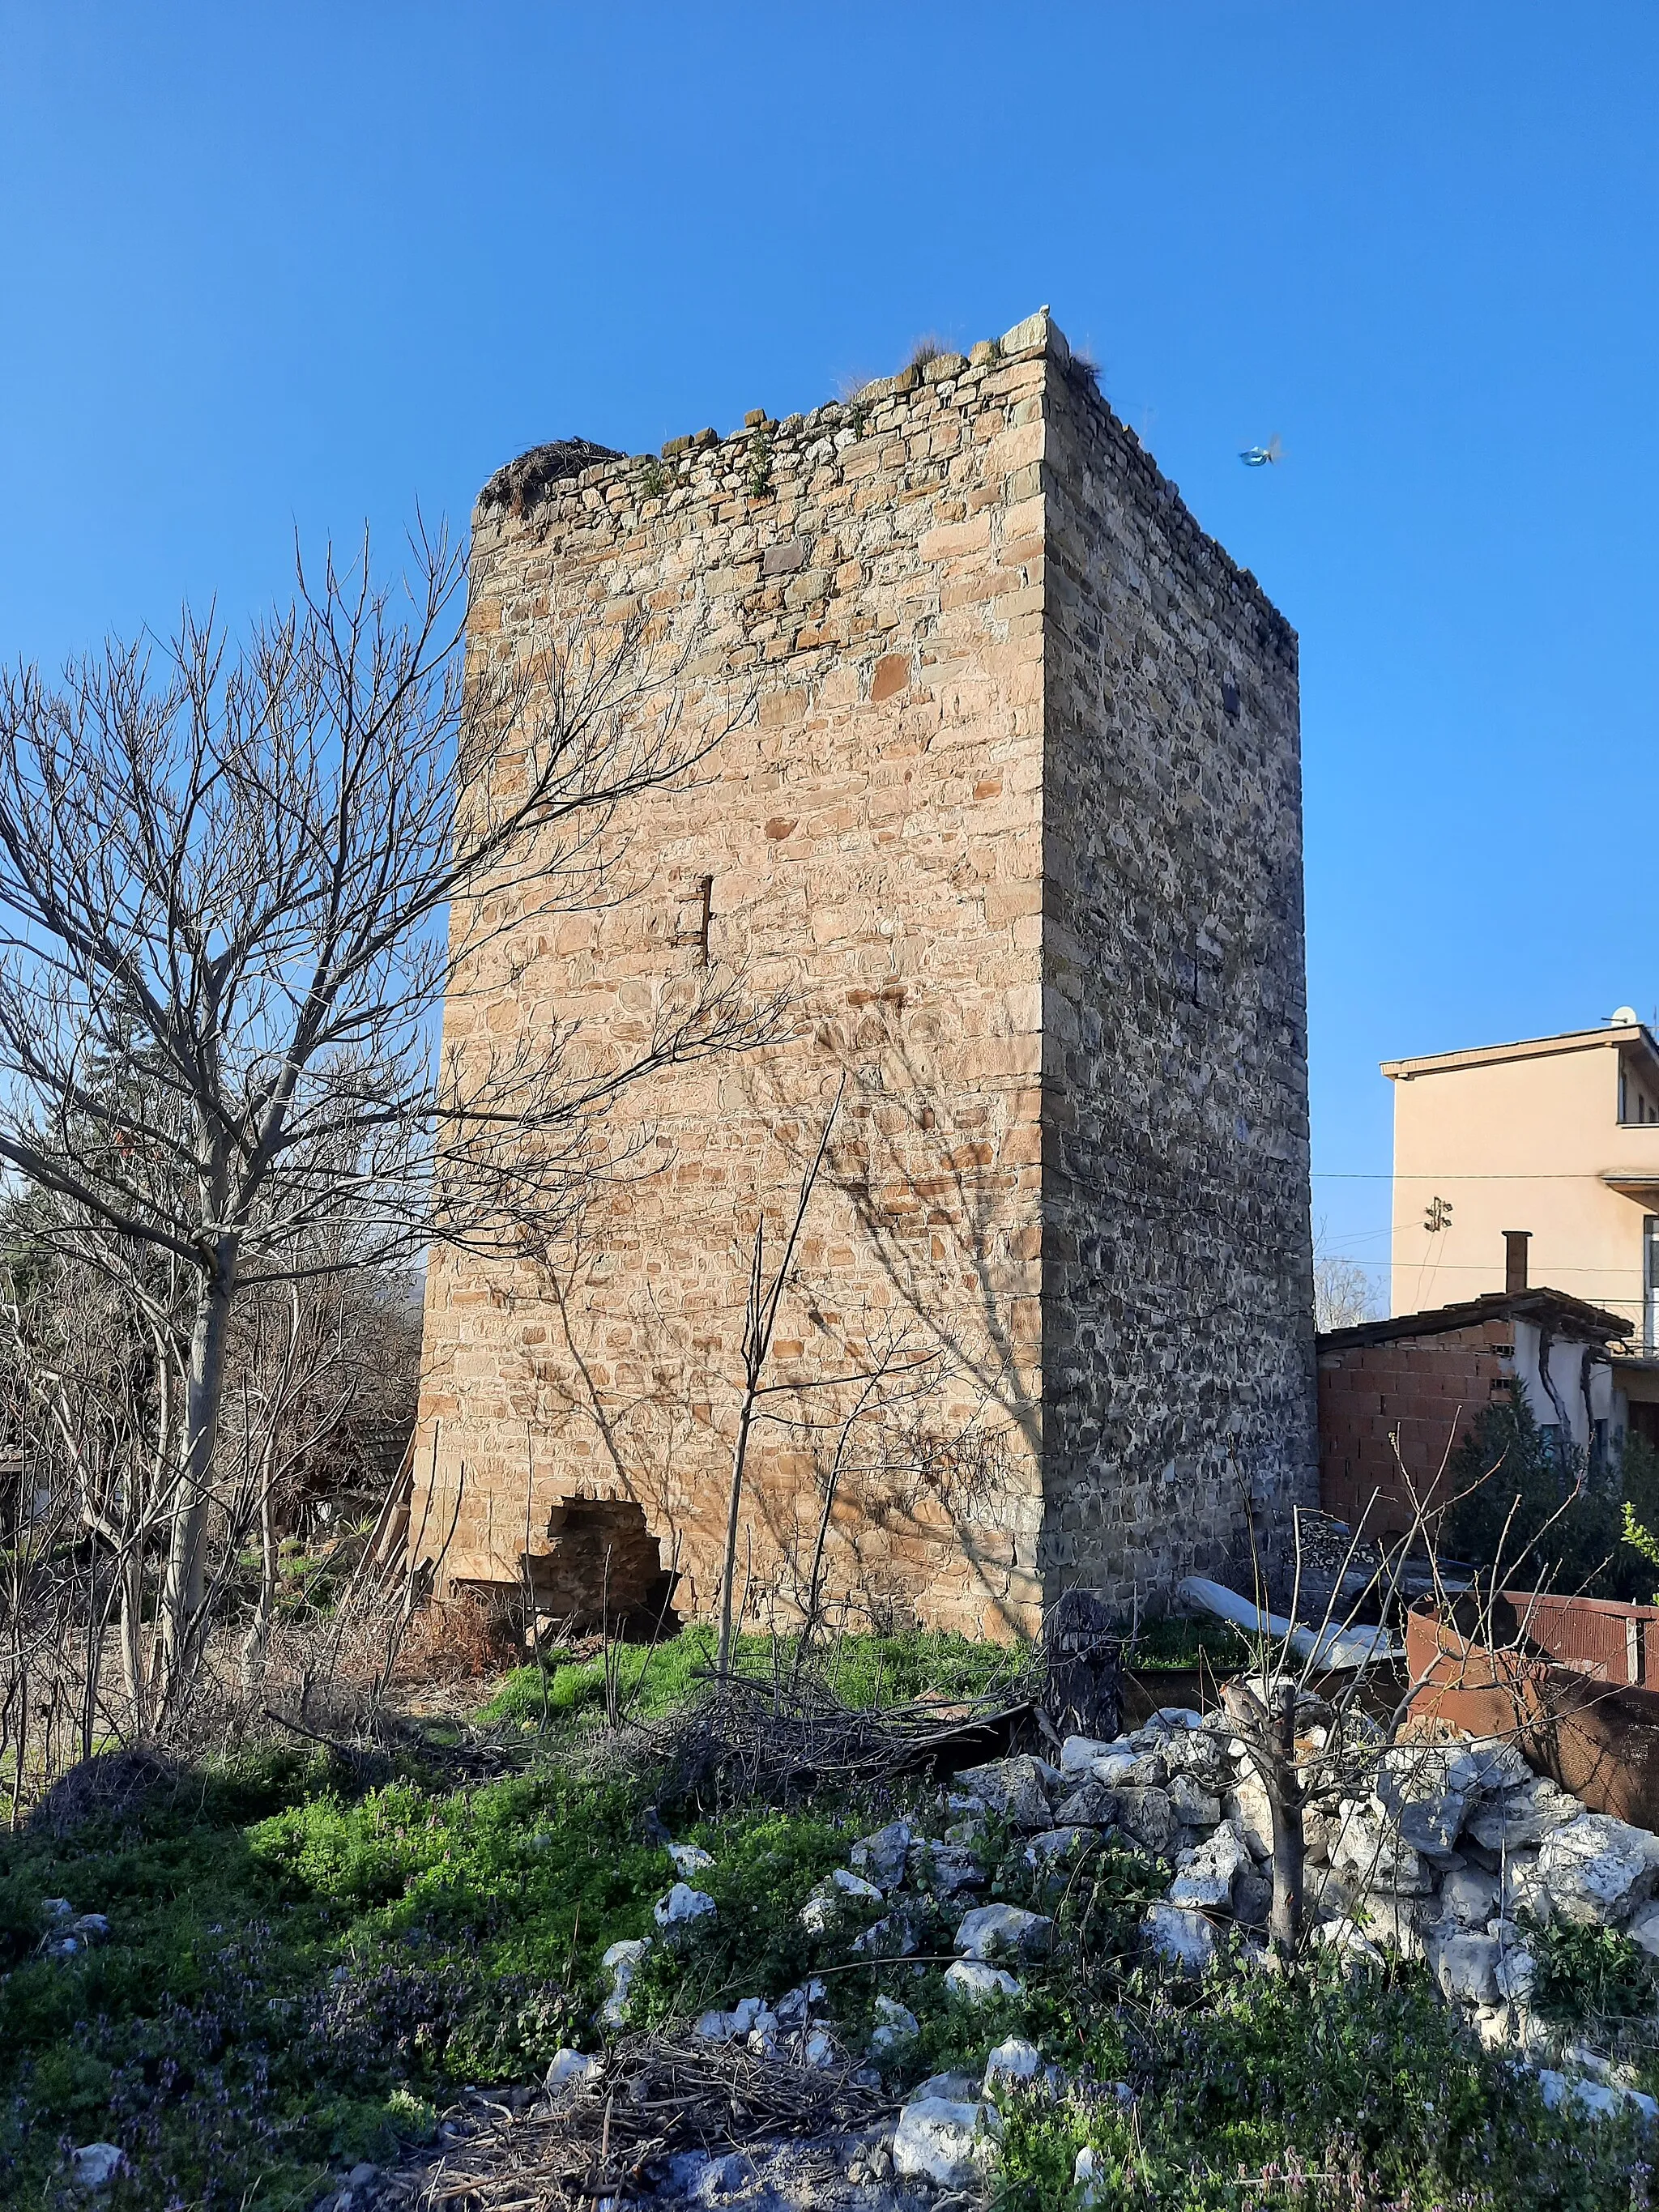 Photo showing: The tower in the village of Manastirec, Municipality of Rosoman. The tower is registered as Cultural heritage site of Macedonia.